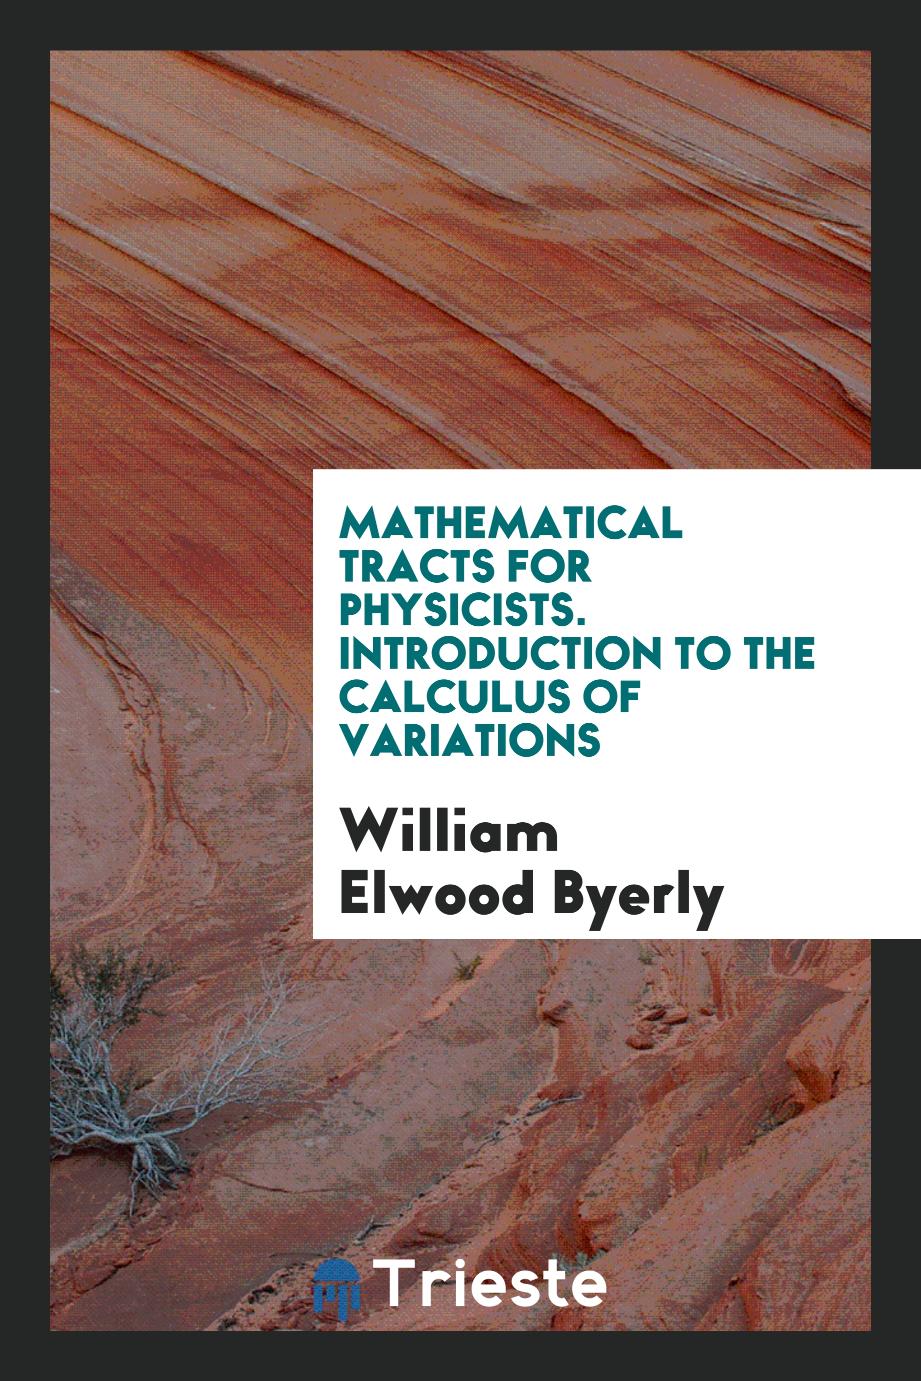 William Elwood Byerly - Mathematical tracts for physicists. Introduction to the Calculus of Variations